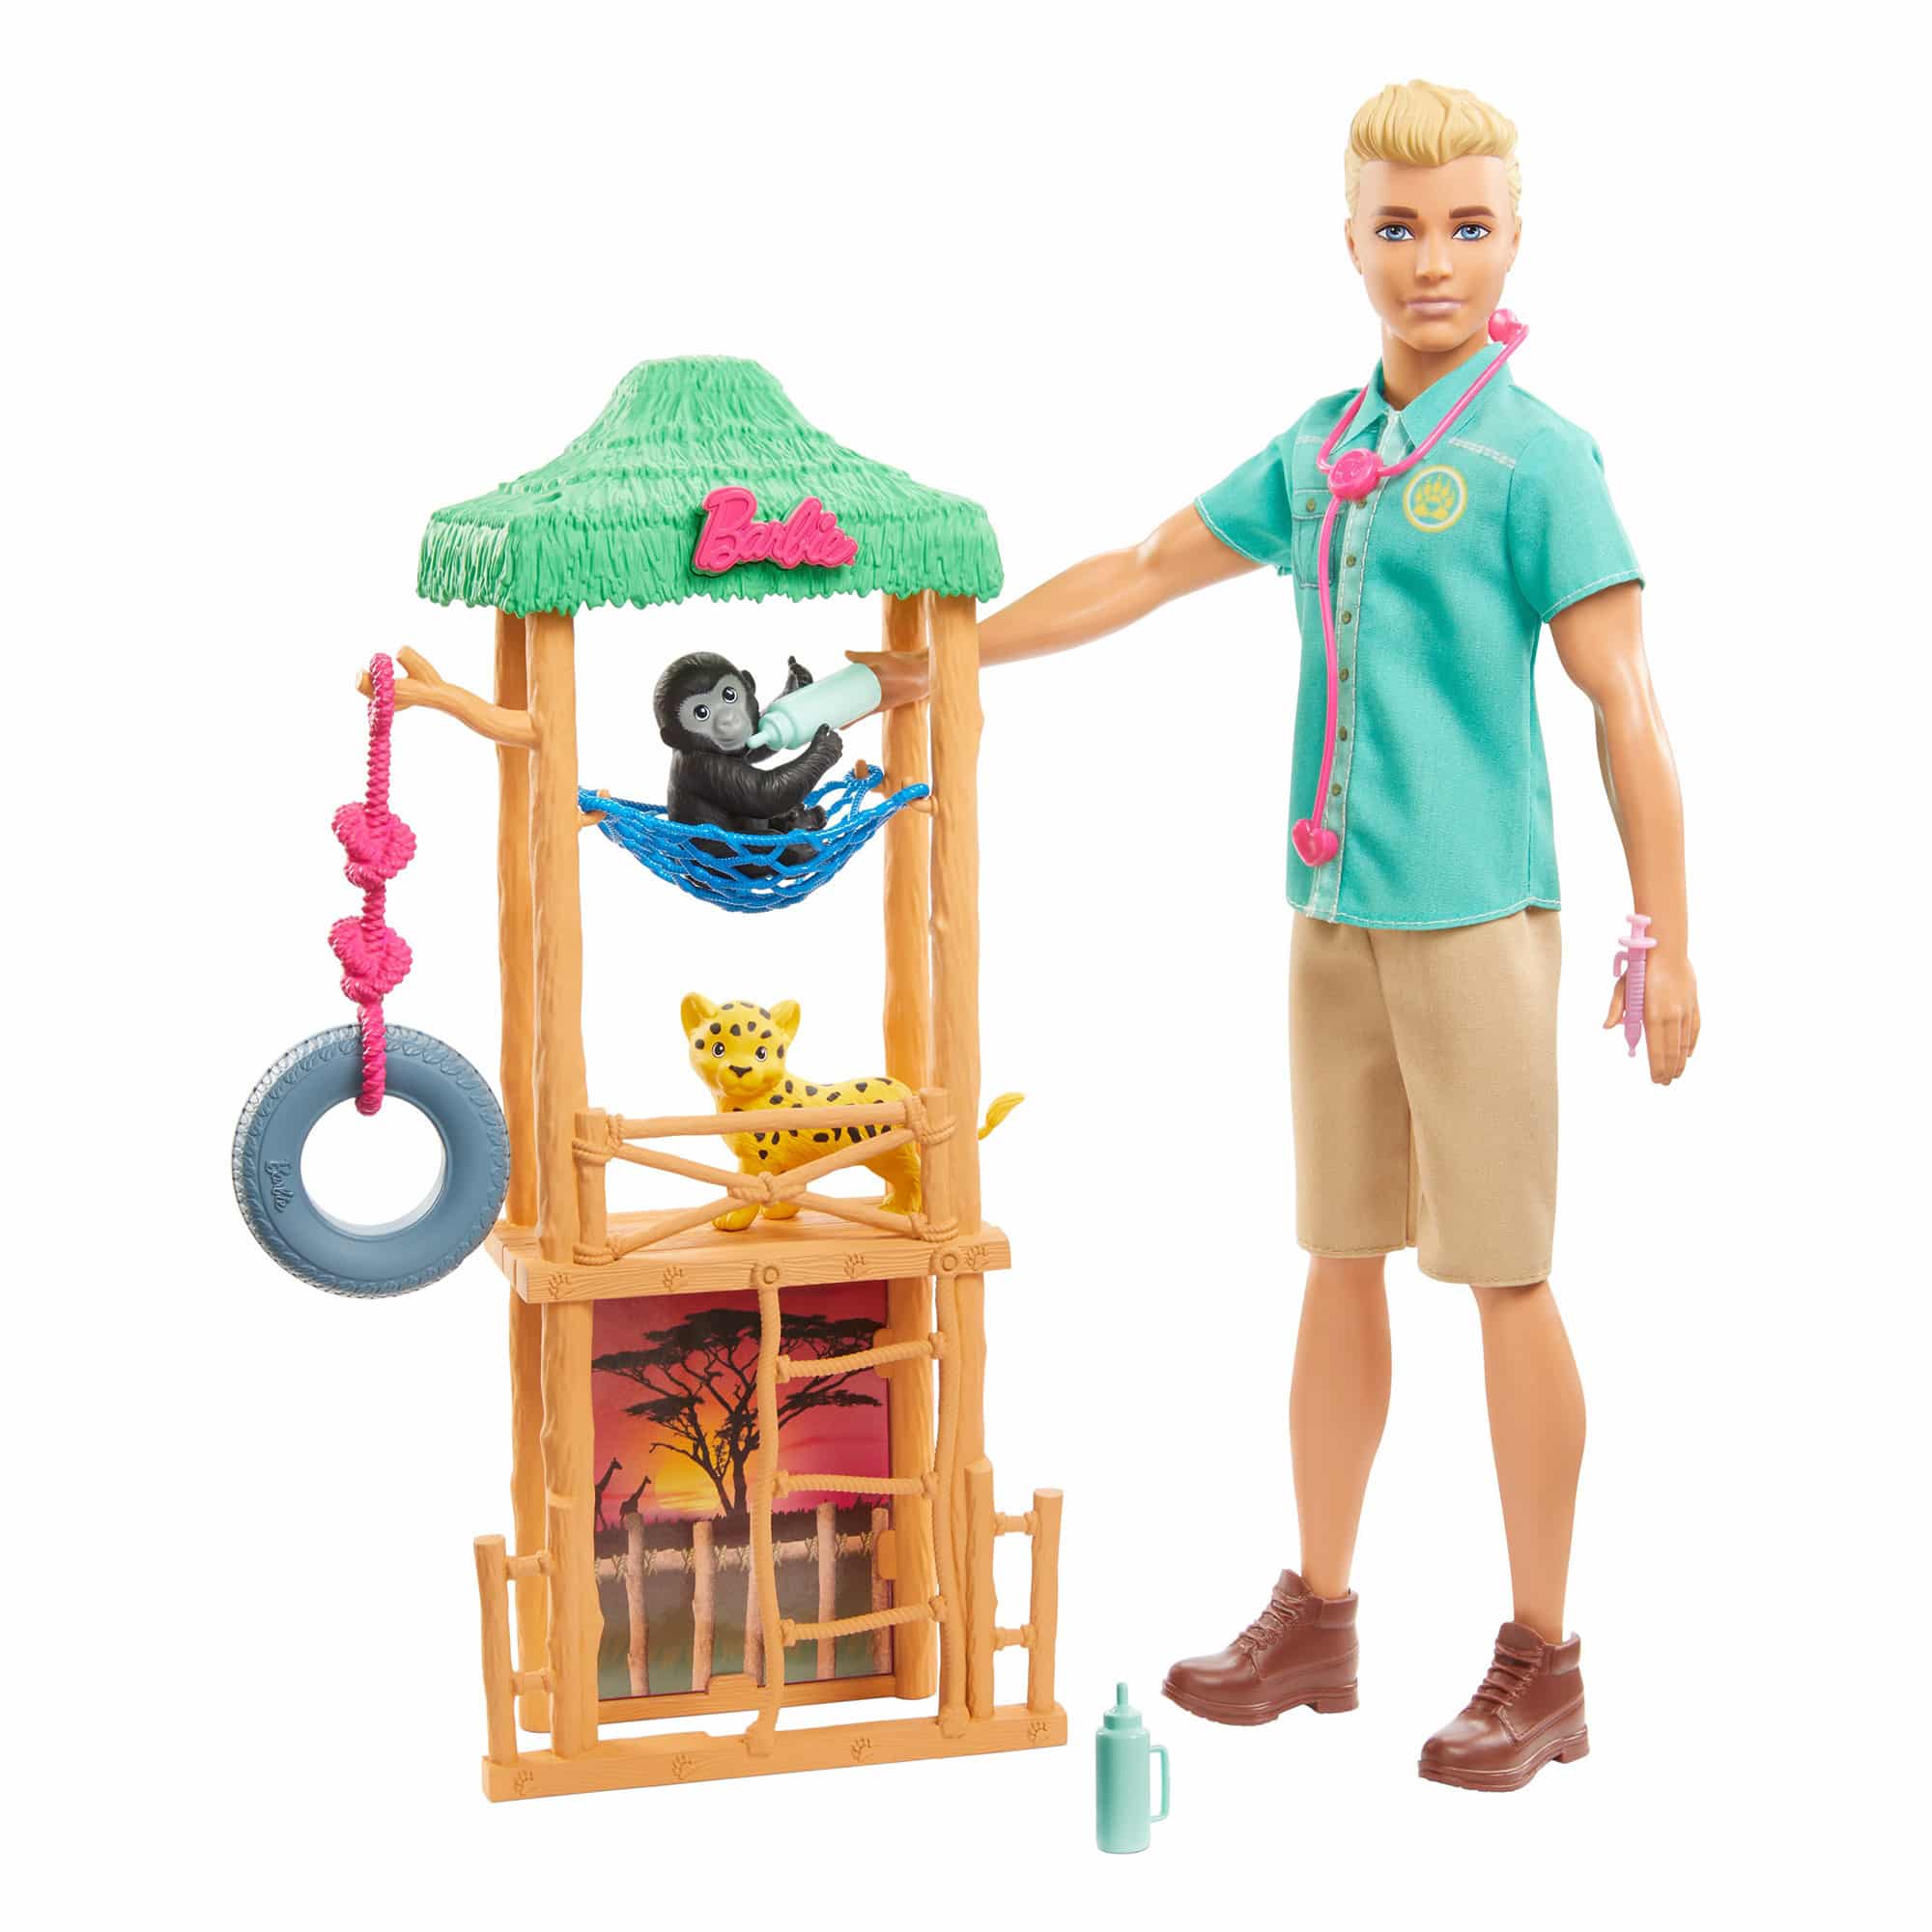 Barbie - You Can Be Anything - Ken Doll Wild Life Vet